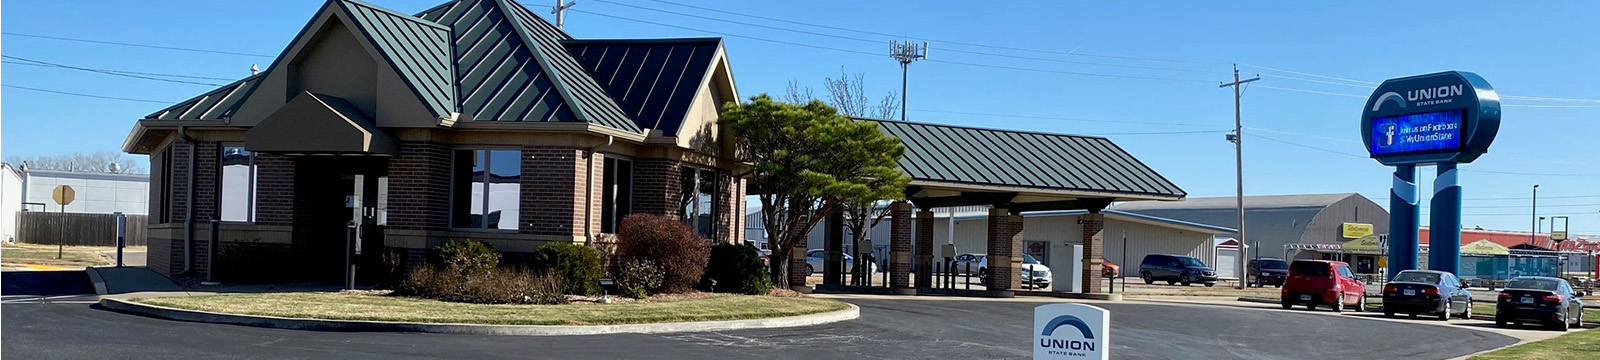 Photo of the exterior of Union State Bank's branch located at 1212 Washington Road in Newton, KS.